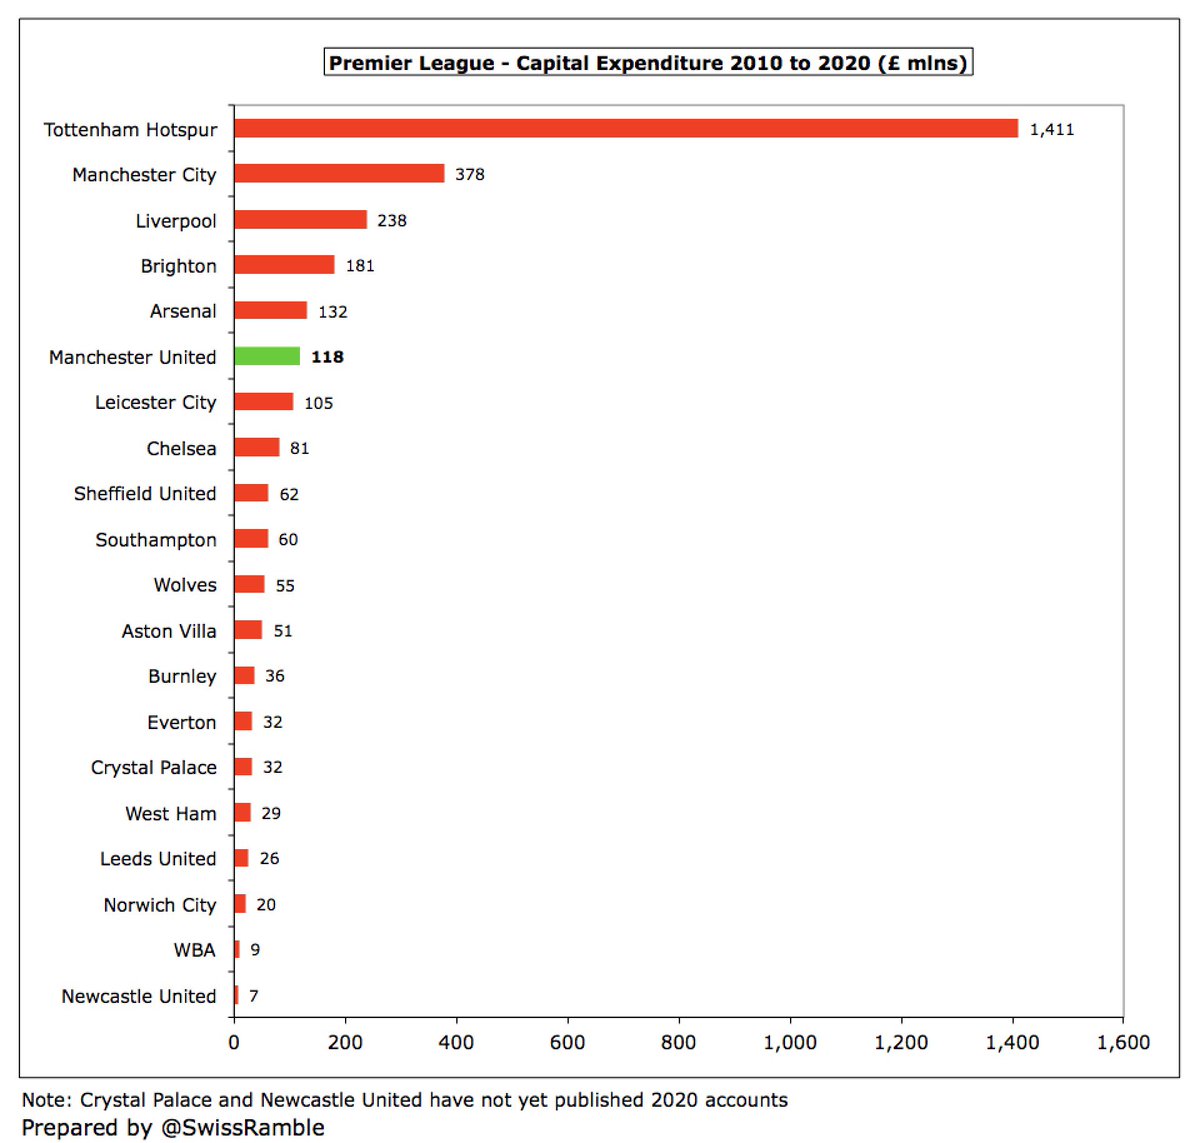  #MUFC have only spent £118m on infrastructure in the last 11 years. Obviously, this is dwarfed by  #THFC £1.4 bln (new stadium and training ground), but it is also lower than  #MCFC £378m,  #LFC £238m,  #BHAFC £181m and  #AFC £132m, where owners have invested in the future.